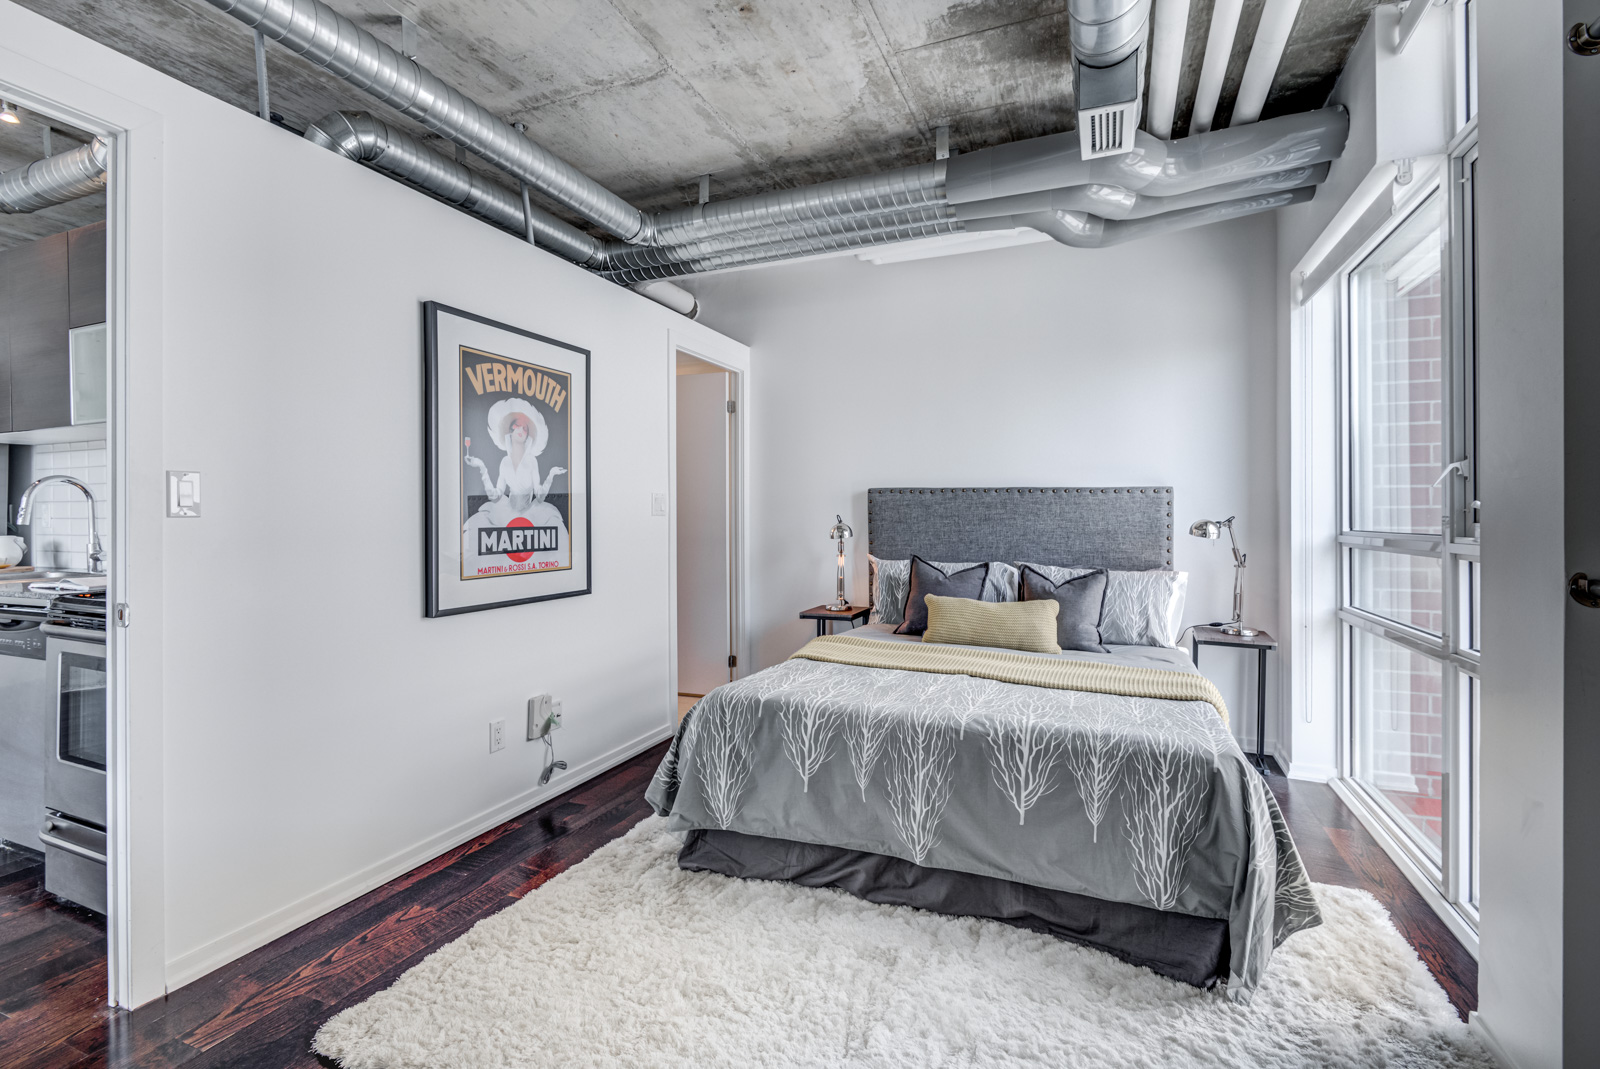 Queen-sized bed in industrial-style master bedroom of 150 Sudbury St #511.